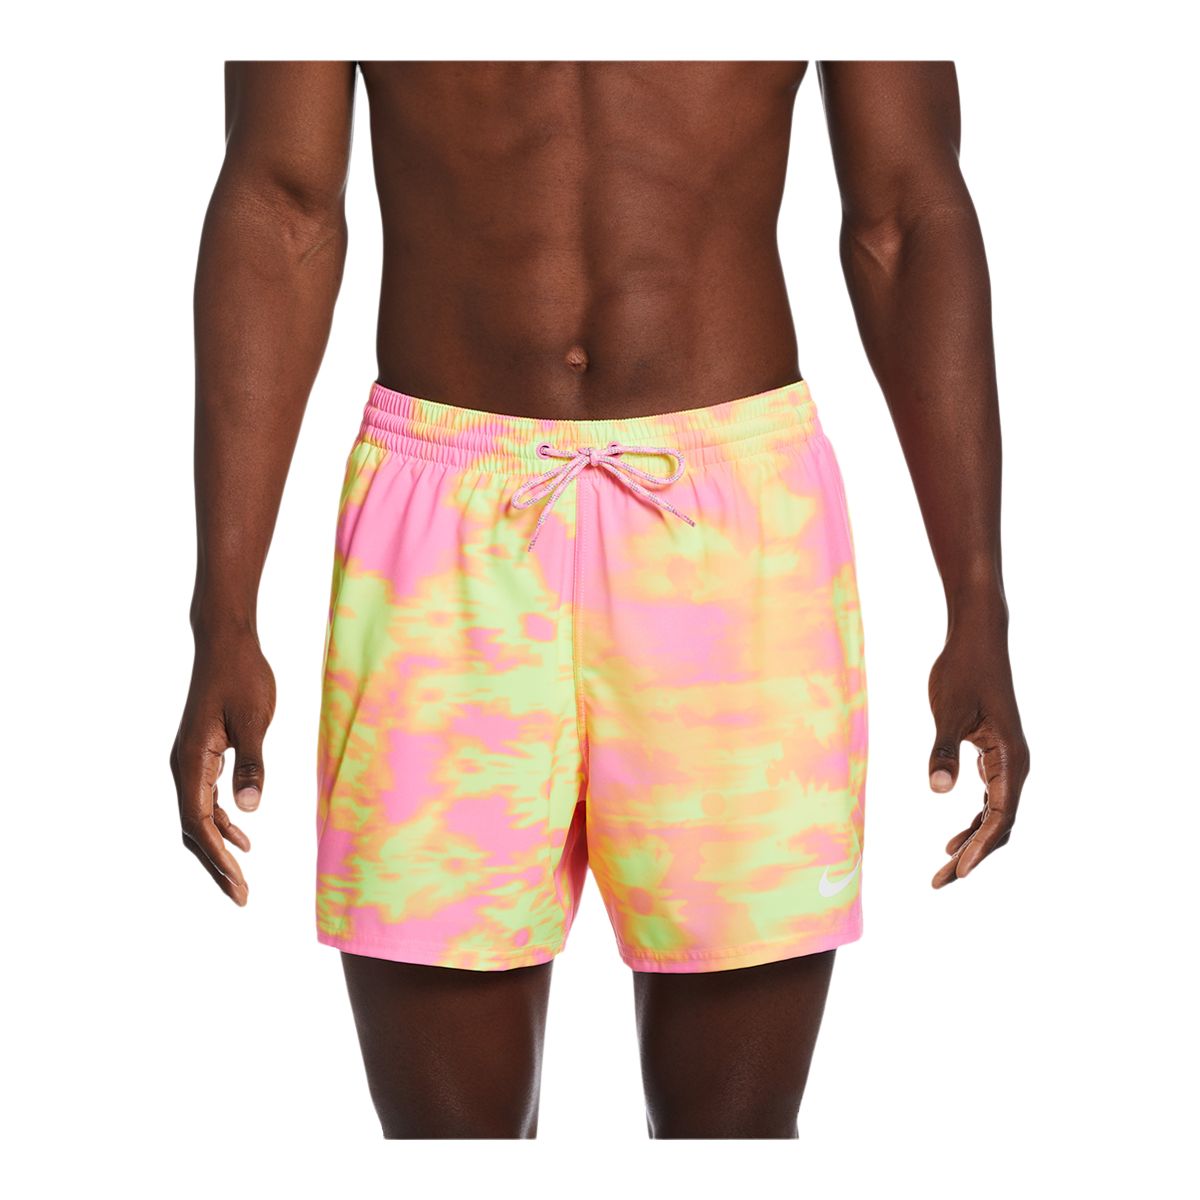 Nike Men's Floral Fade Inch Volley Shorts